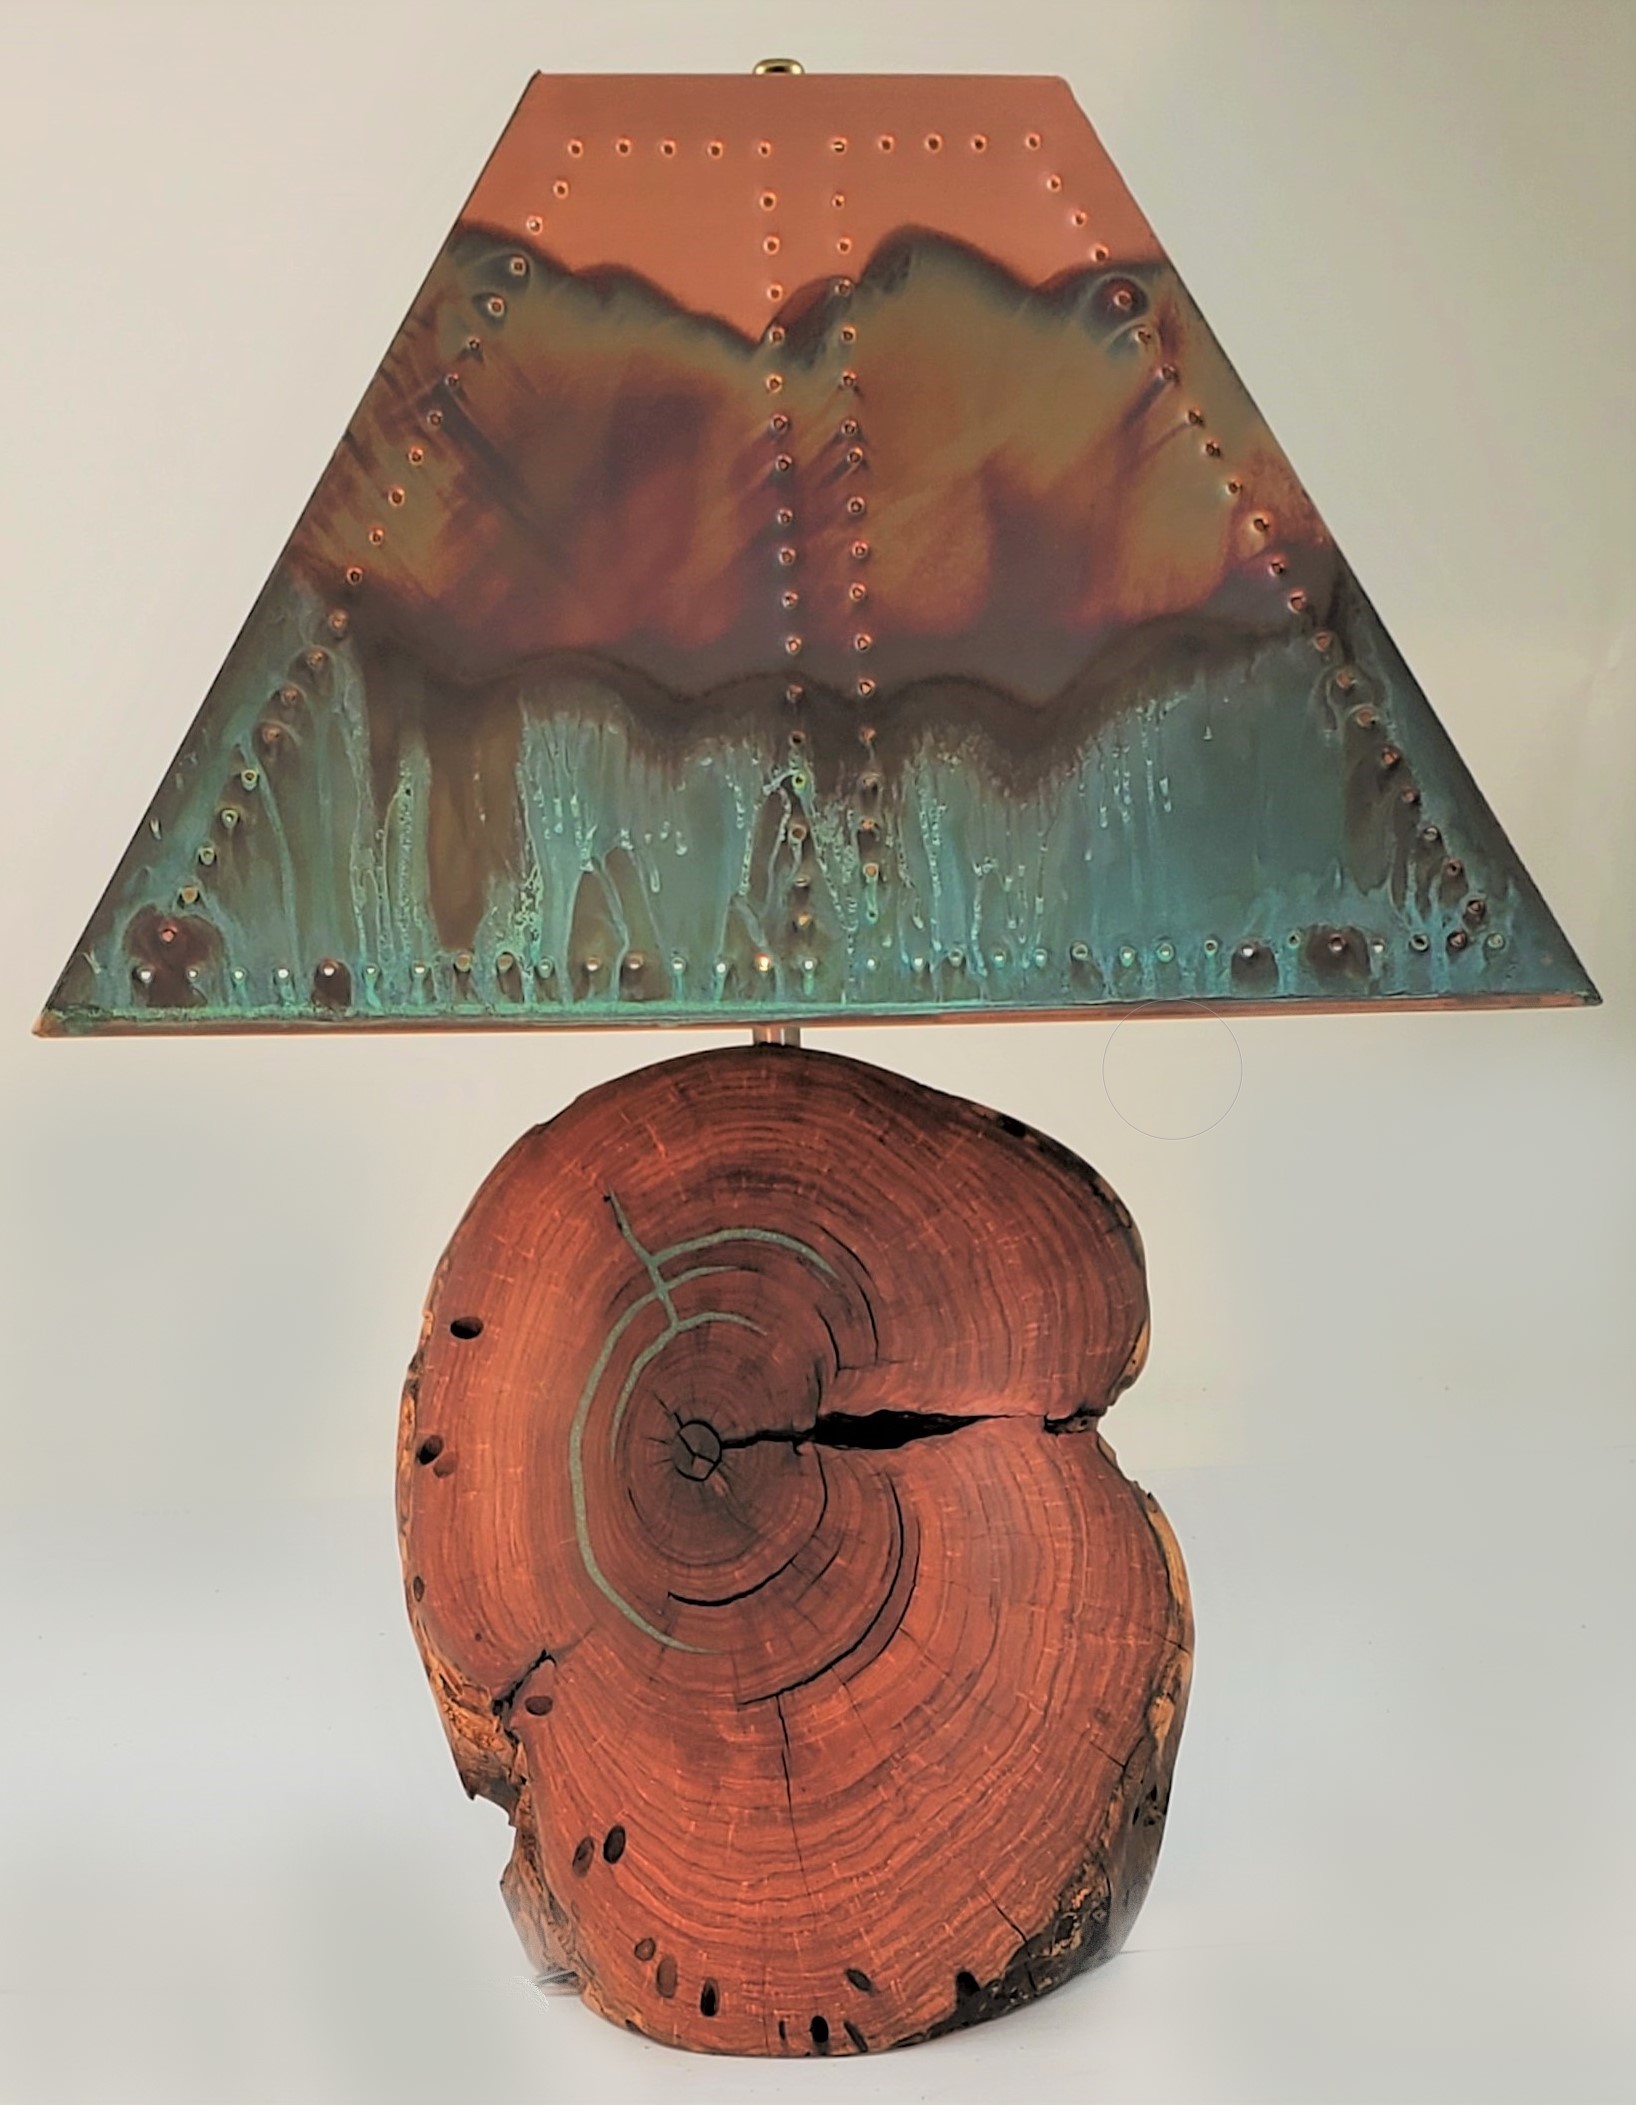 Mesquite Lamp with Turquoise Inlay and Copper Shade (Height: 24") #1022